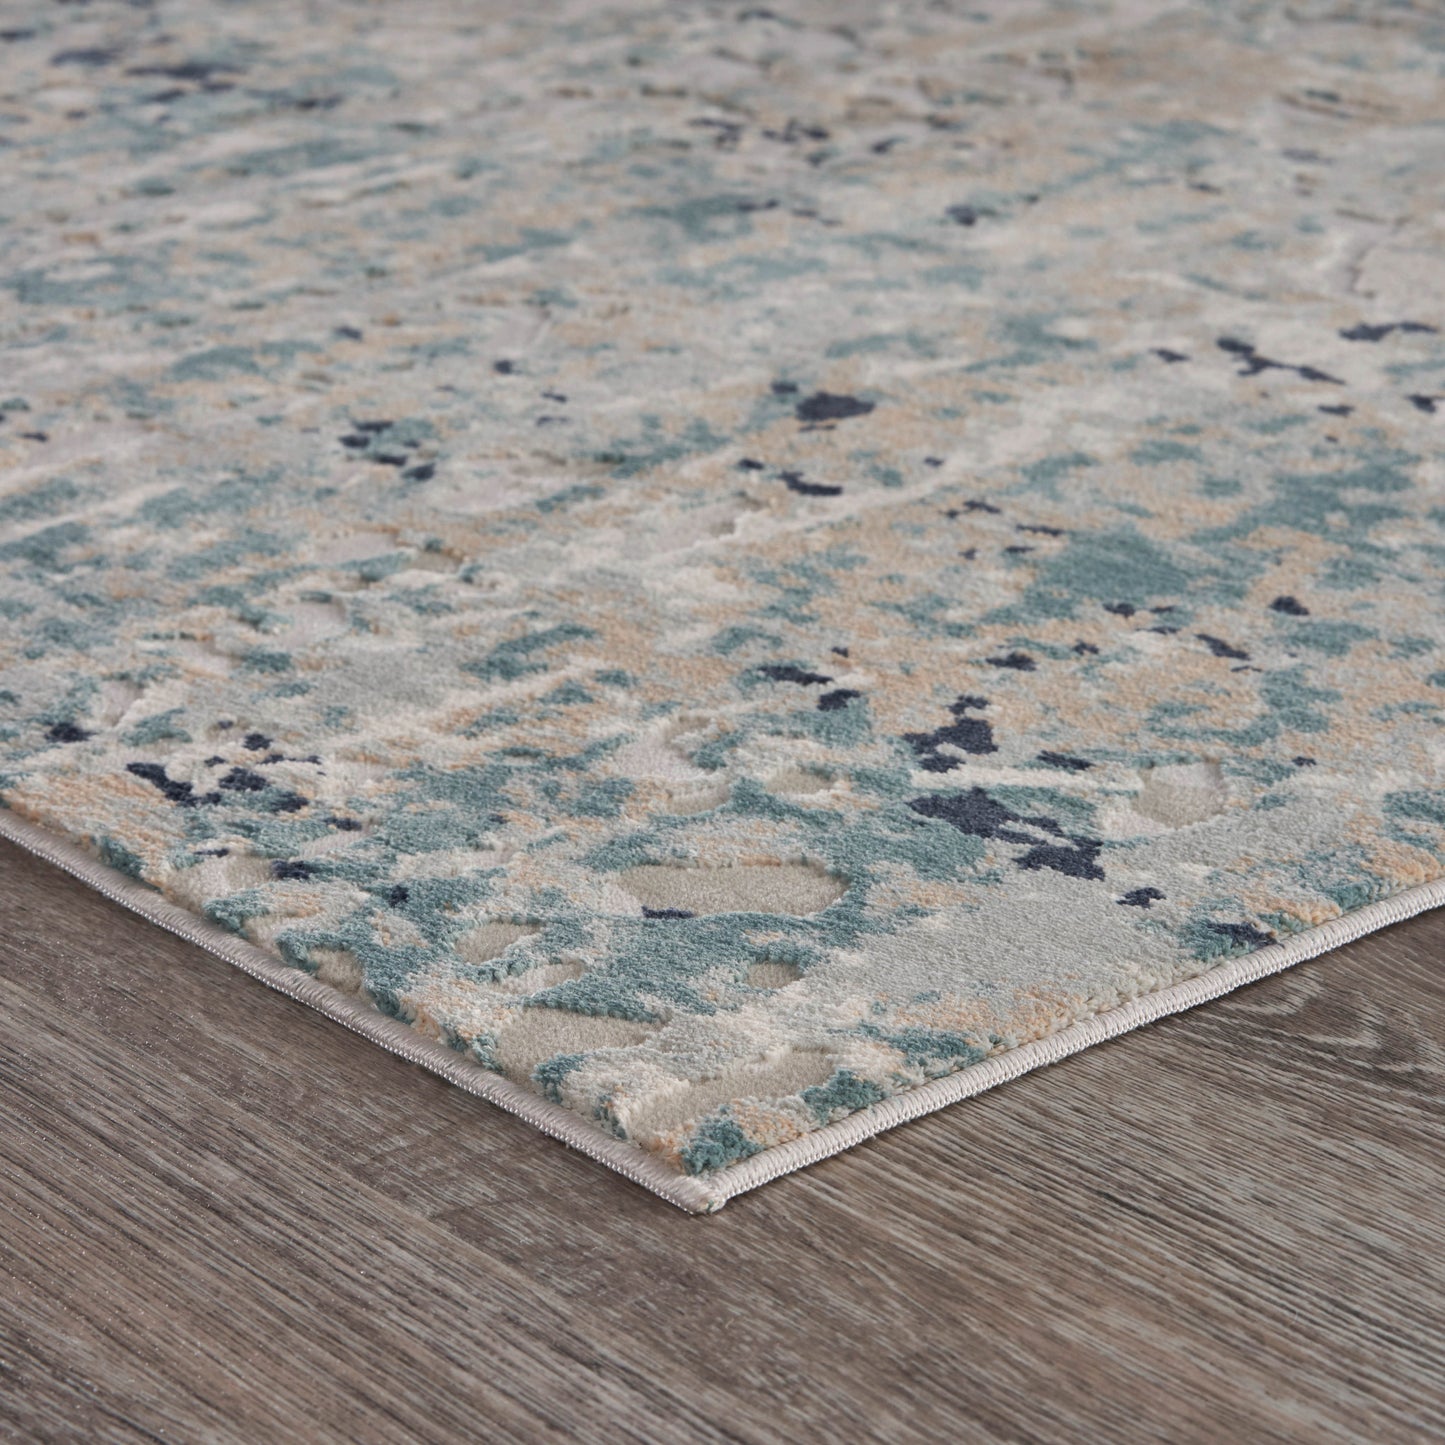 2' X 3' Gray Blue Taupe And Cream Abstract Distressed Stain Resistant Area Rug